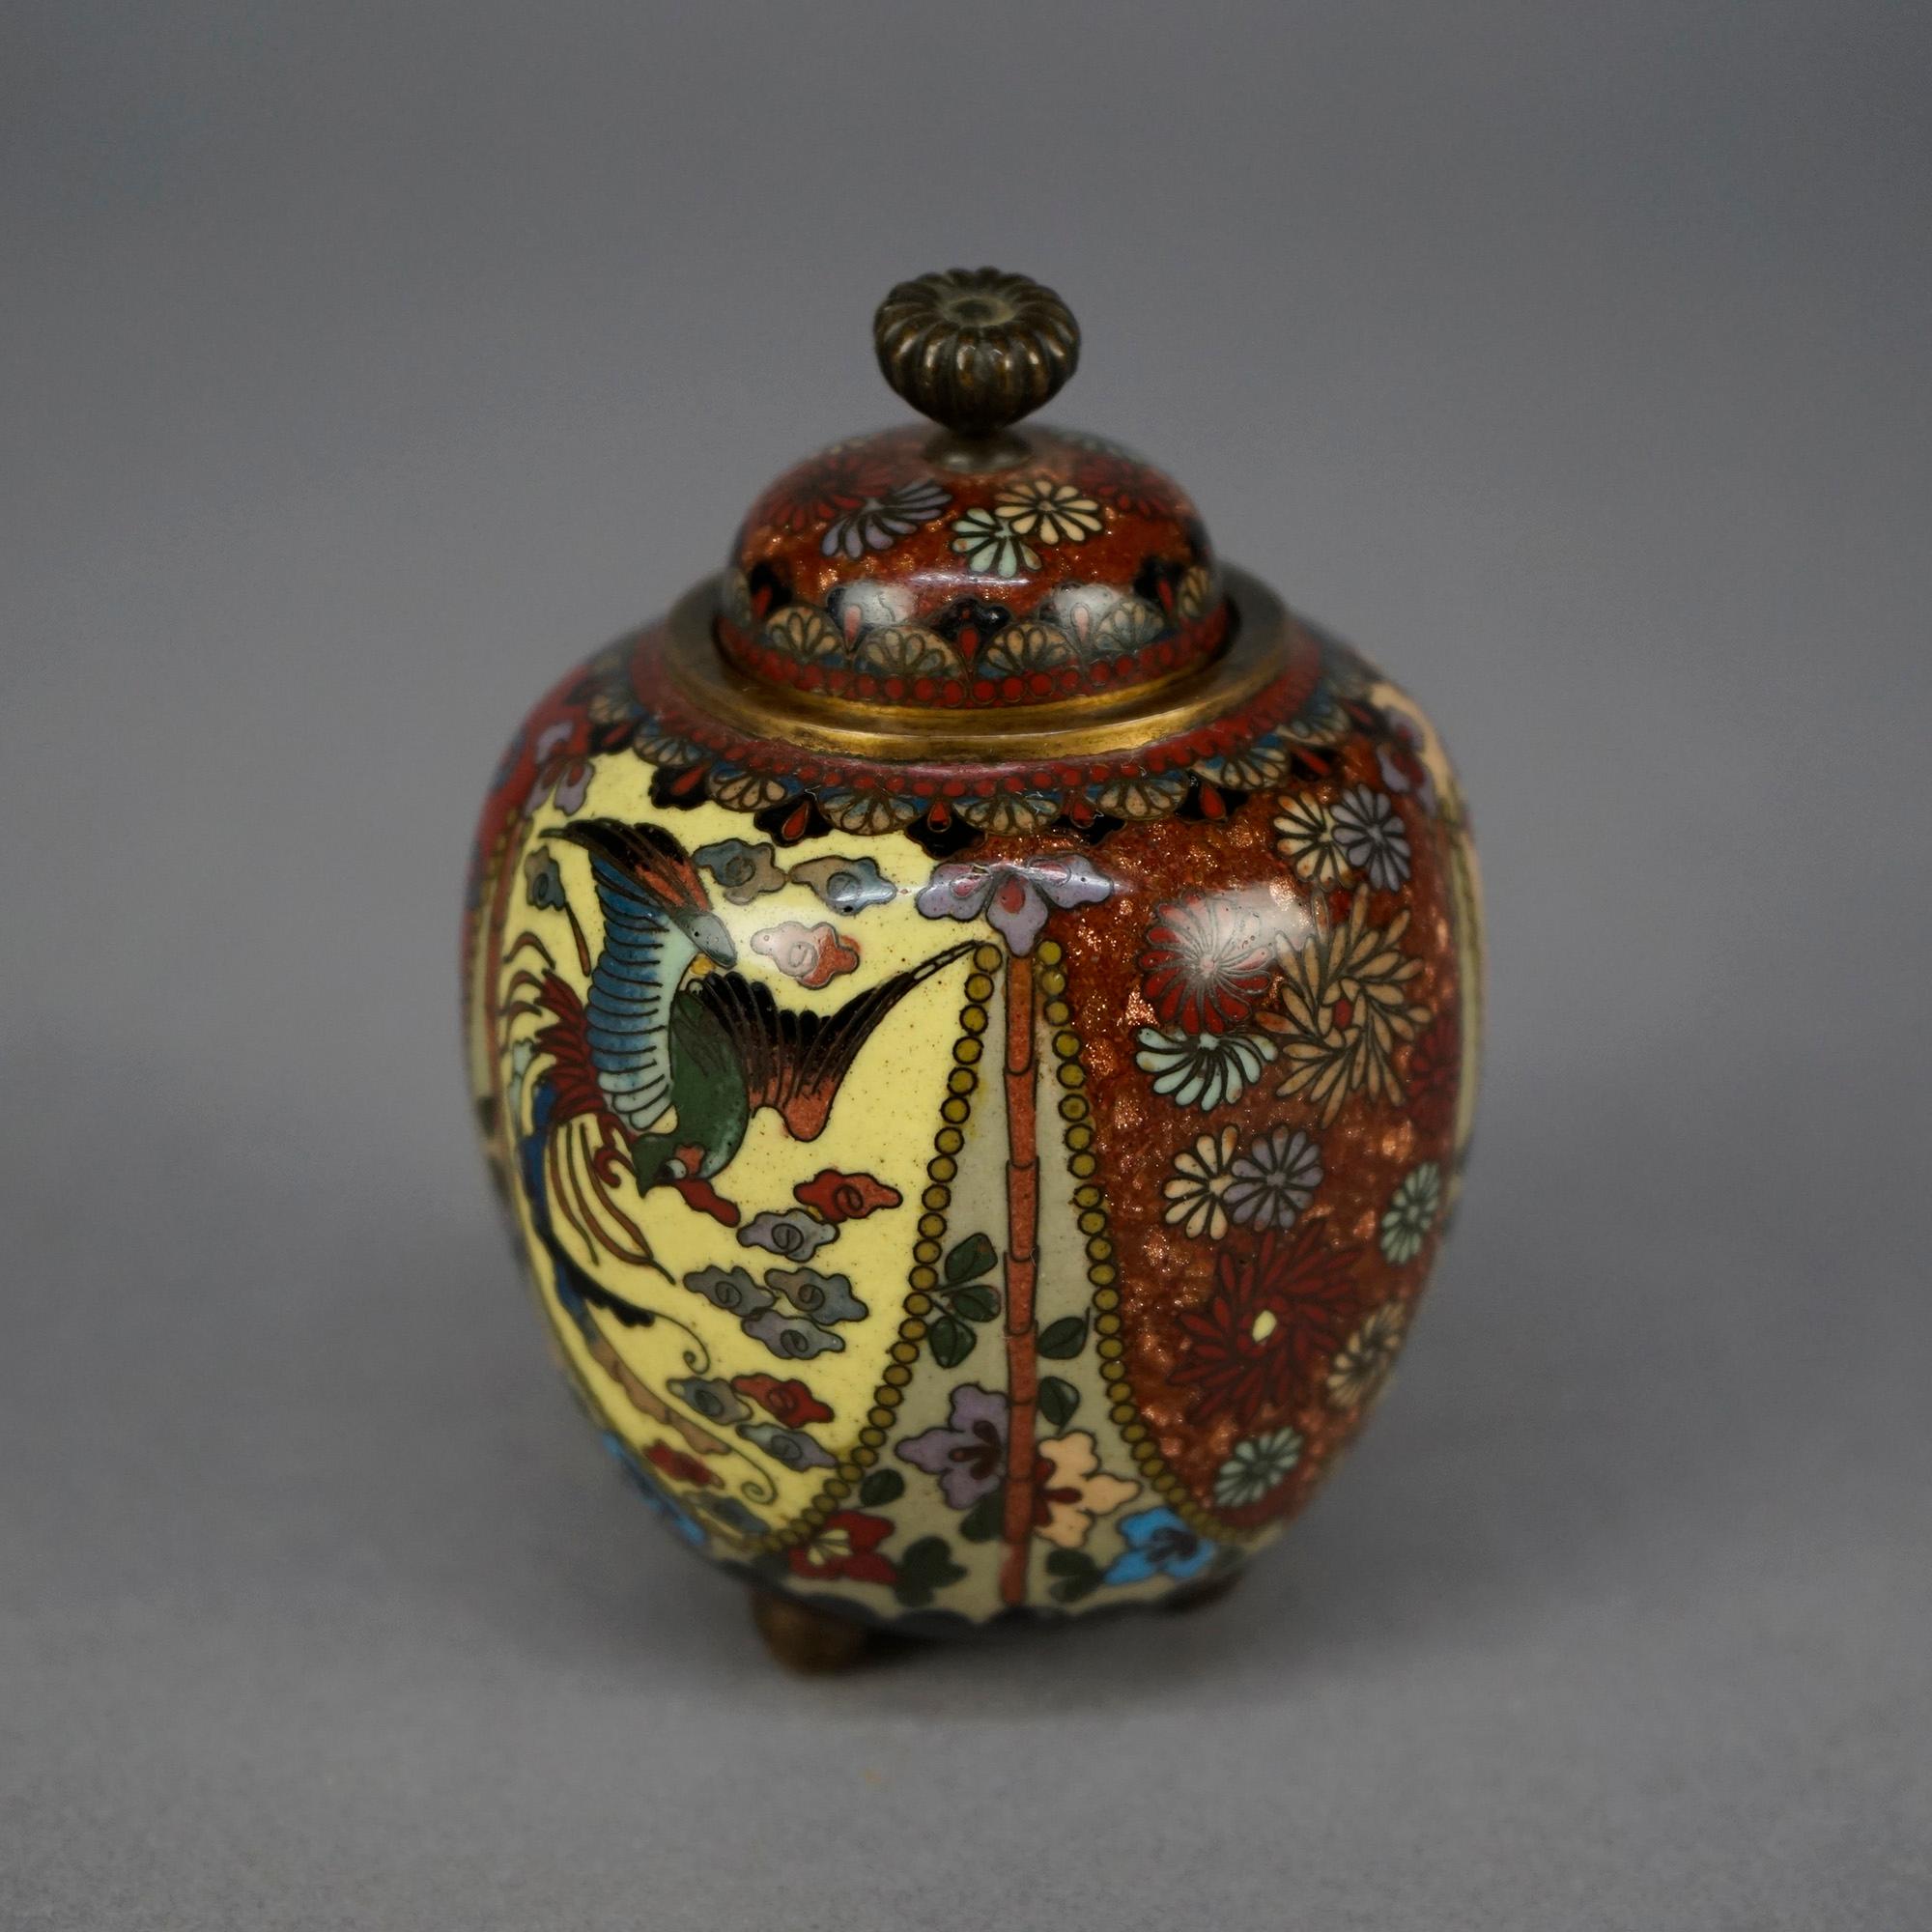 An antique Cloisonne scent jar offers enameled metalwork construction with reserves having birds, butterflies and foliate elements, lidded and footed, c1930

Measures- 4''H x 2.75''W x 2.75''D

Catalogue Note: Ask about DISCOUNTED DELIVERY RATES